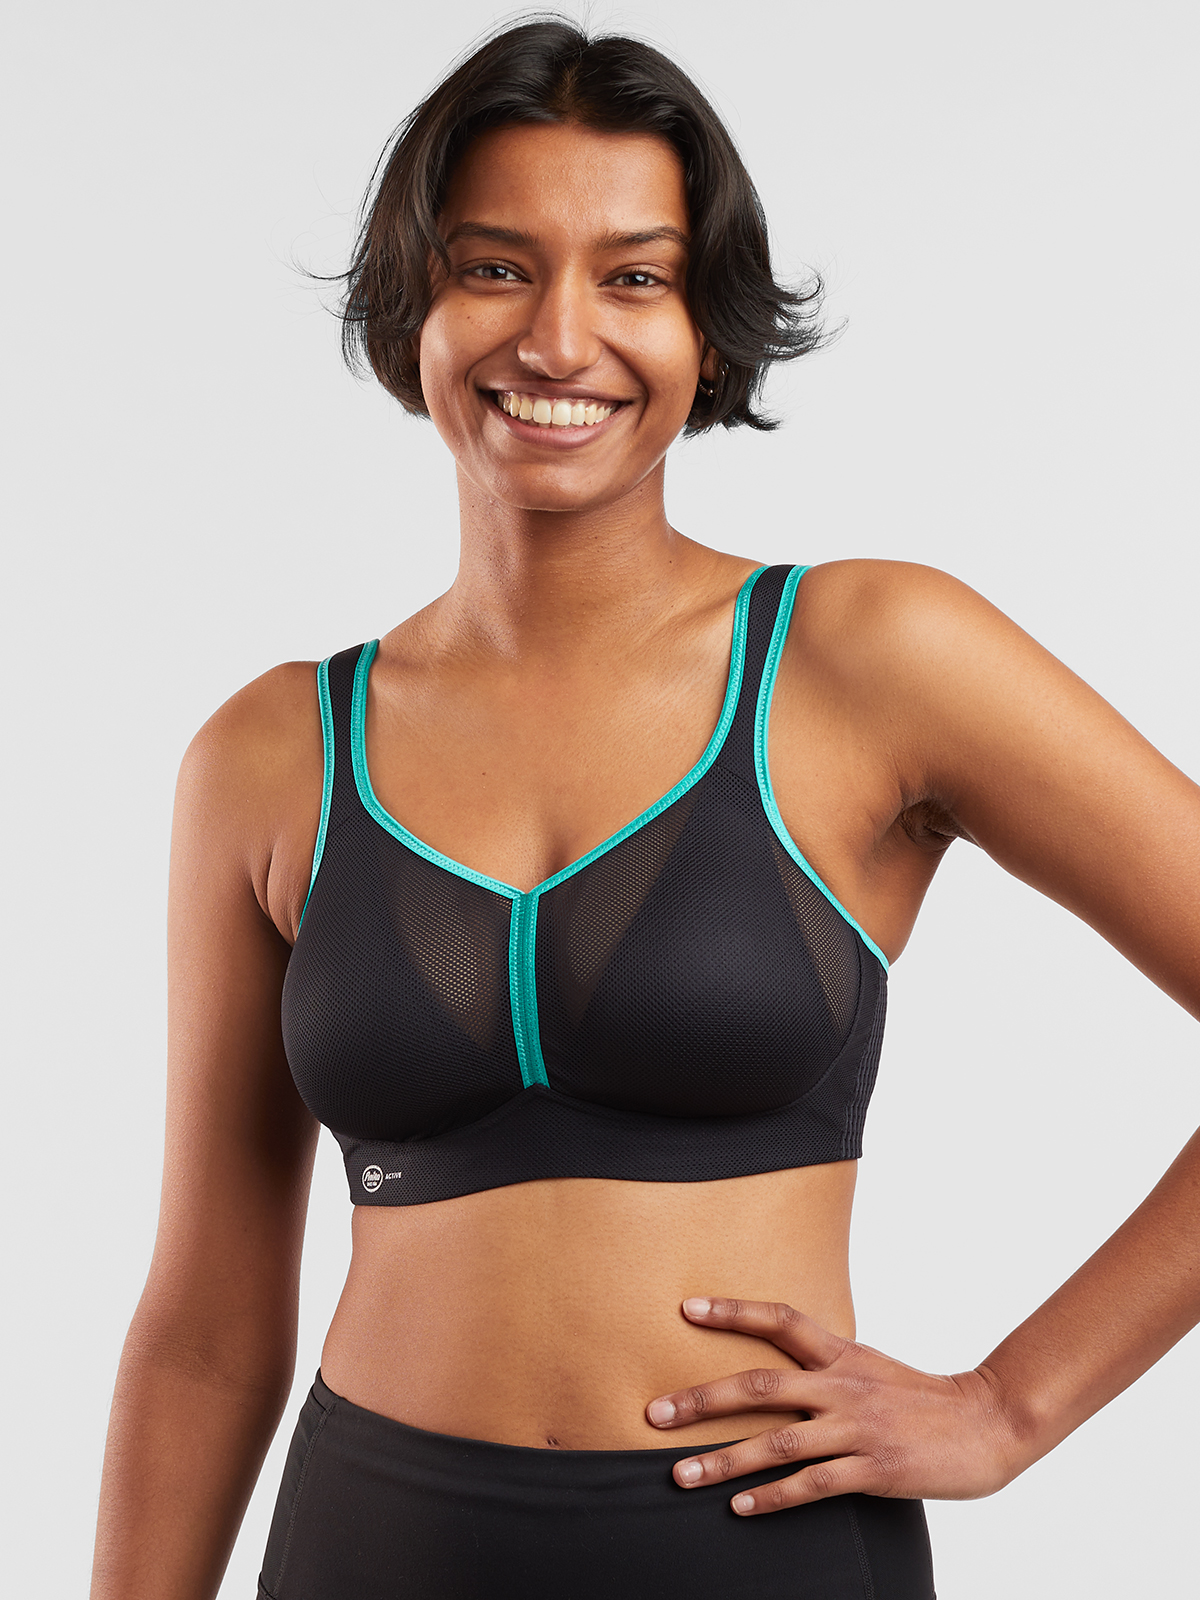 Your sporting must have - a great-fitting sports bra! - National